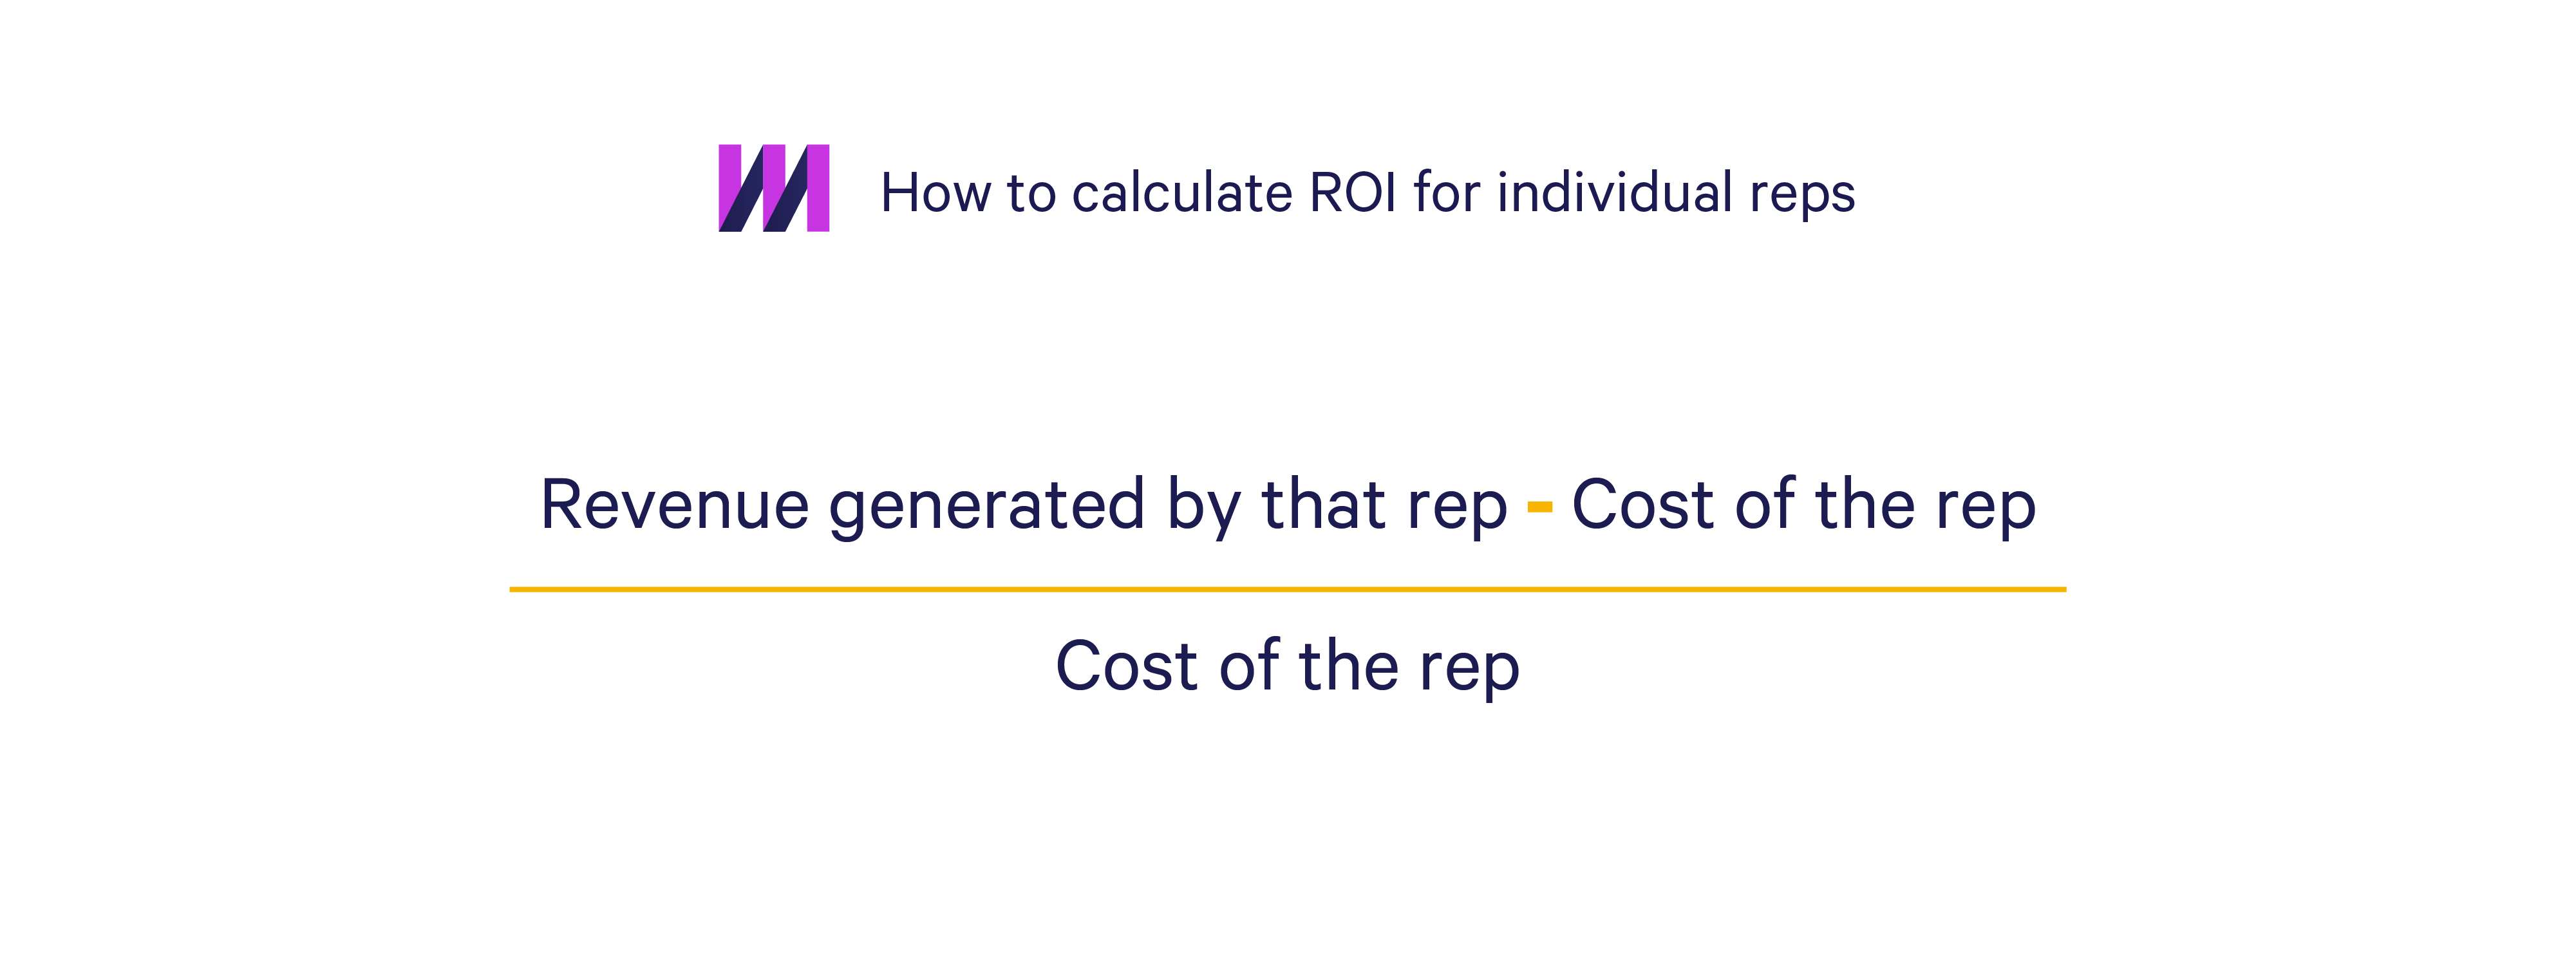 How to calculate ROI for individual reps